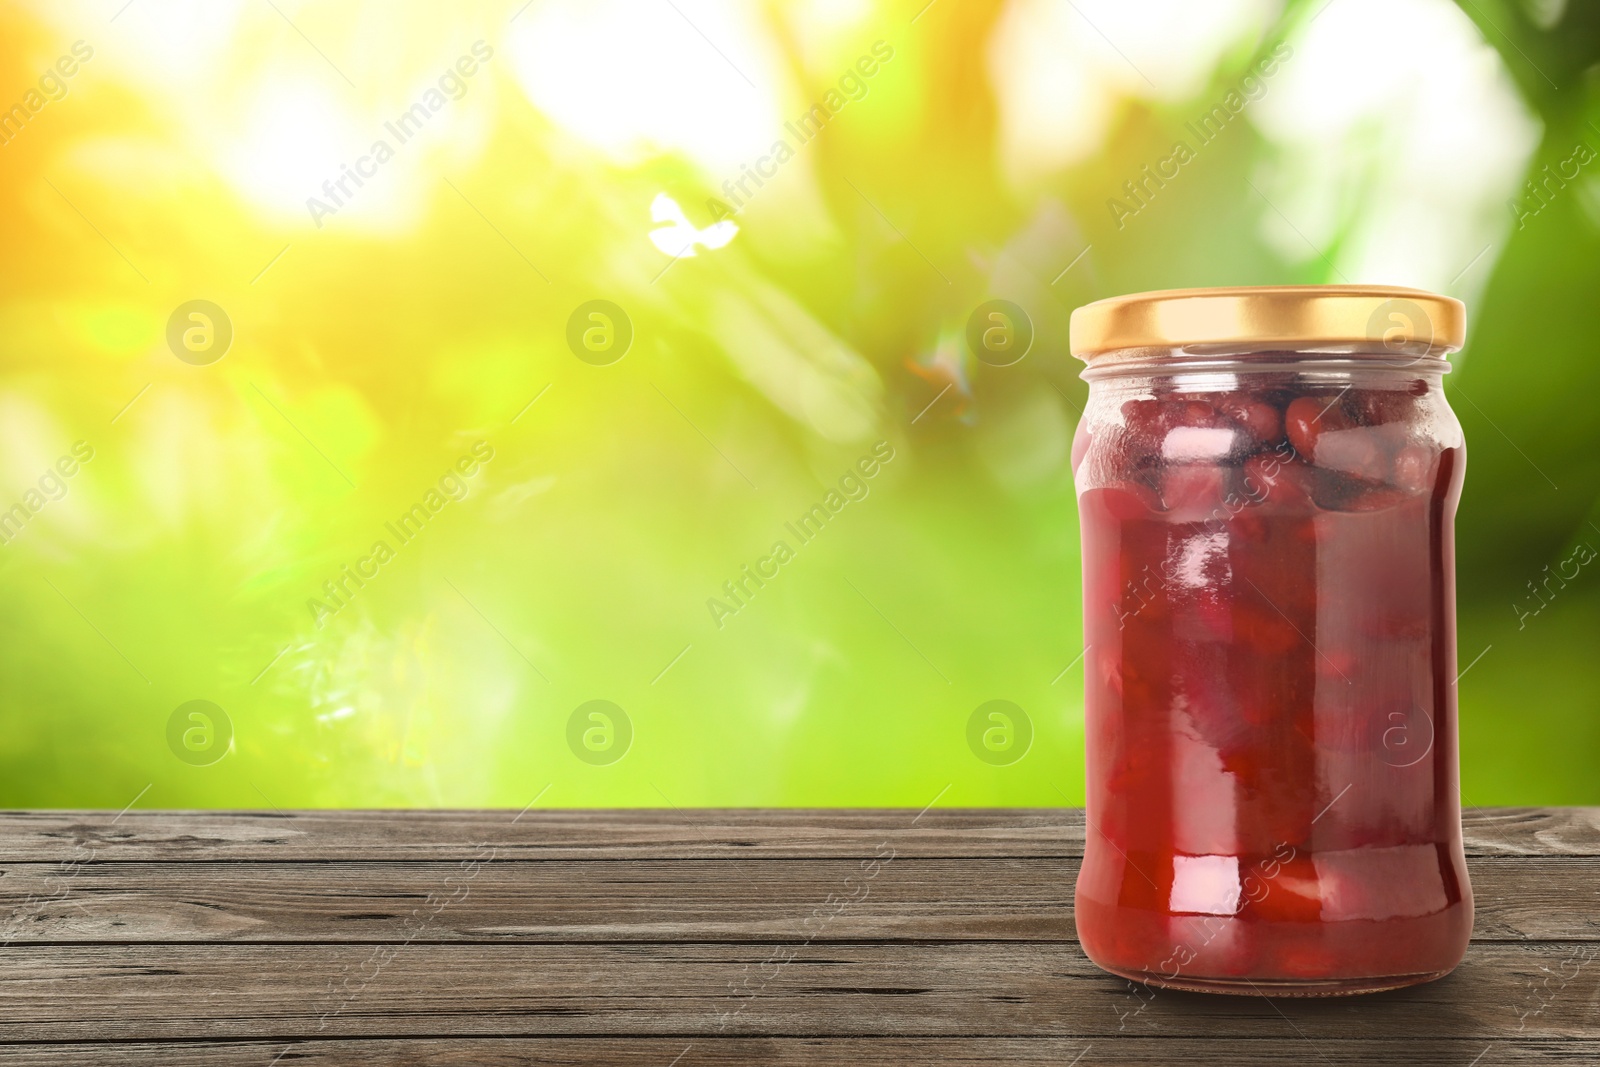 Image of Jar of pickled beans on wooden table against blurred background, space for text